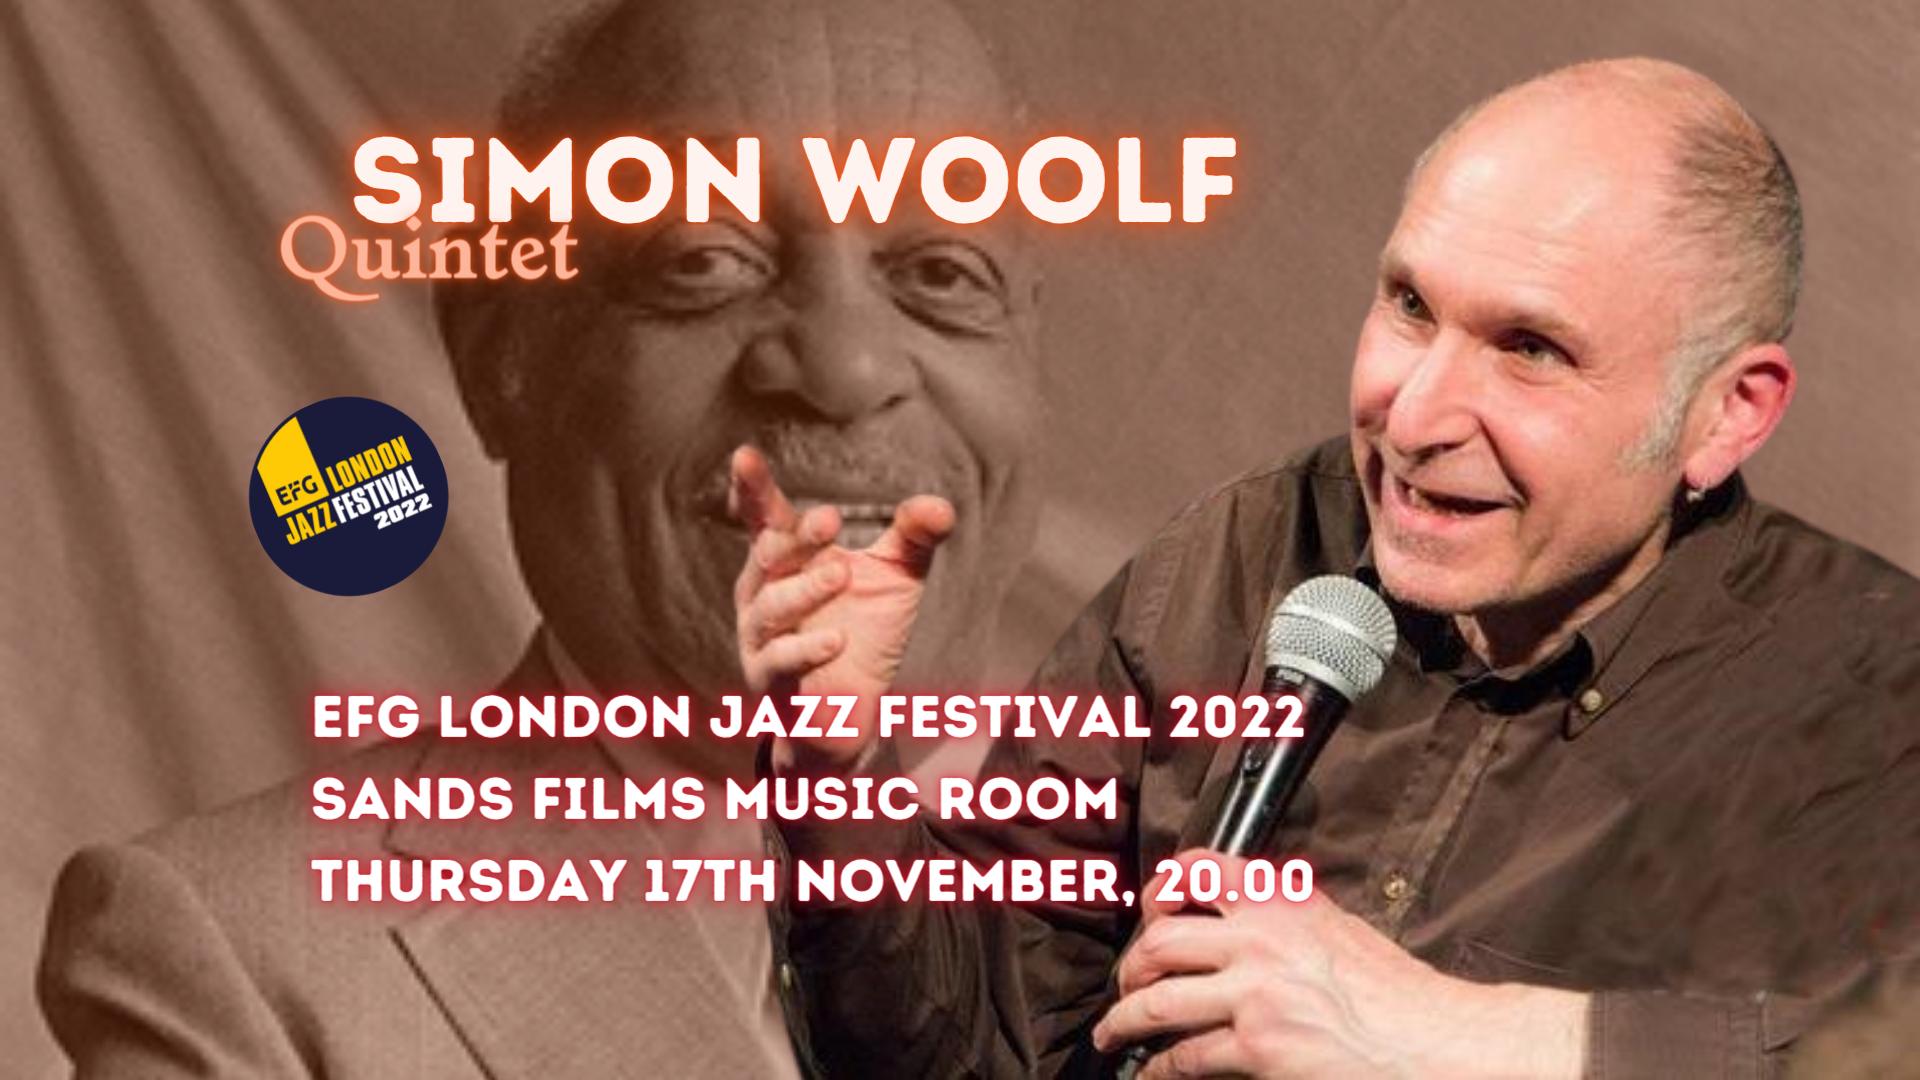 SIMON WOOLF QUINTET Tribute to Benny "King" Carter ~ Live Broadcast